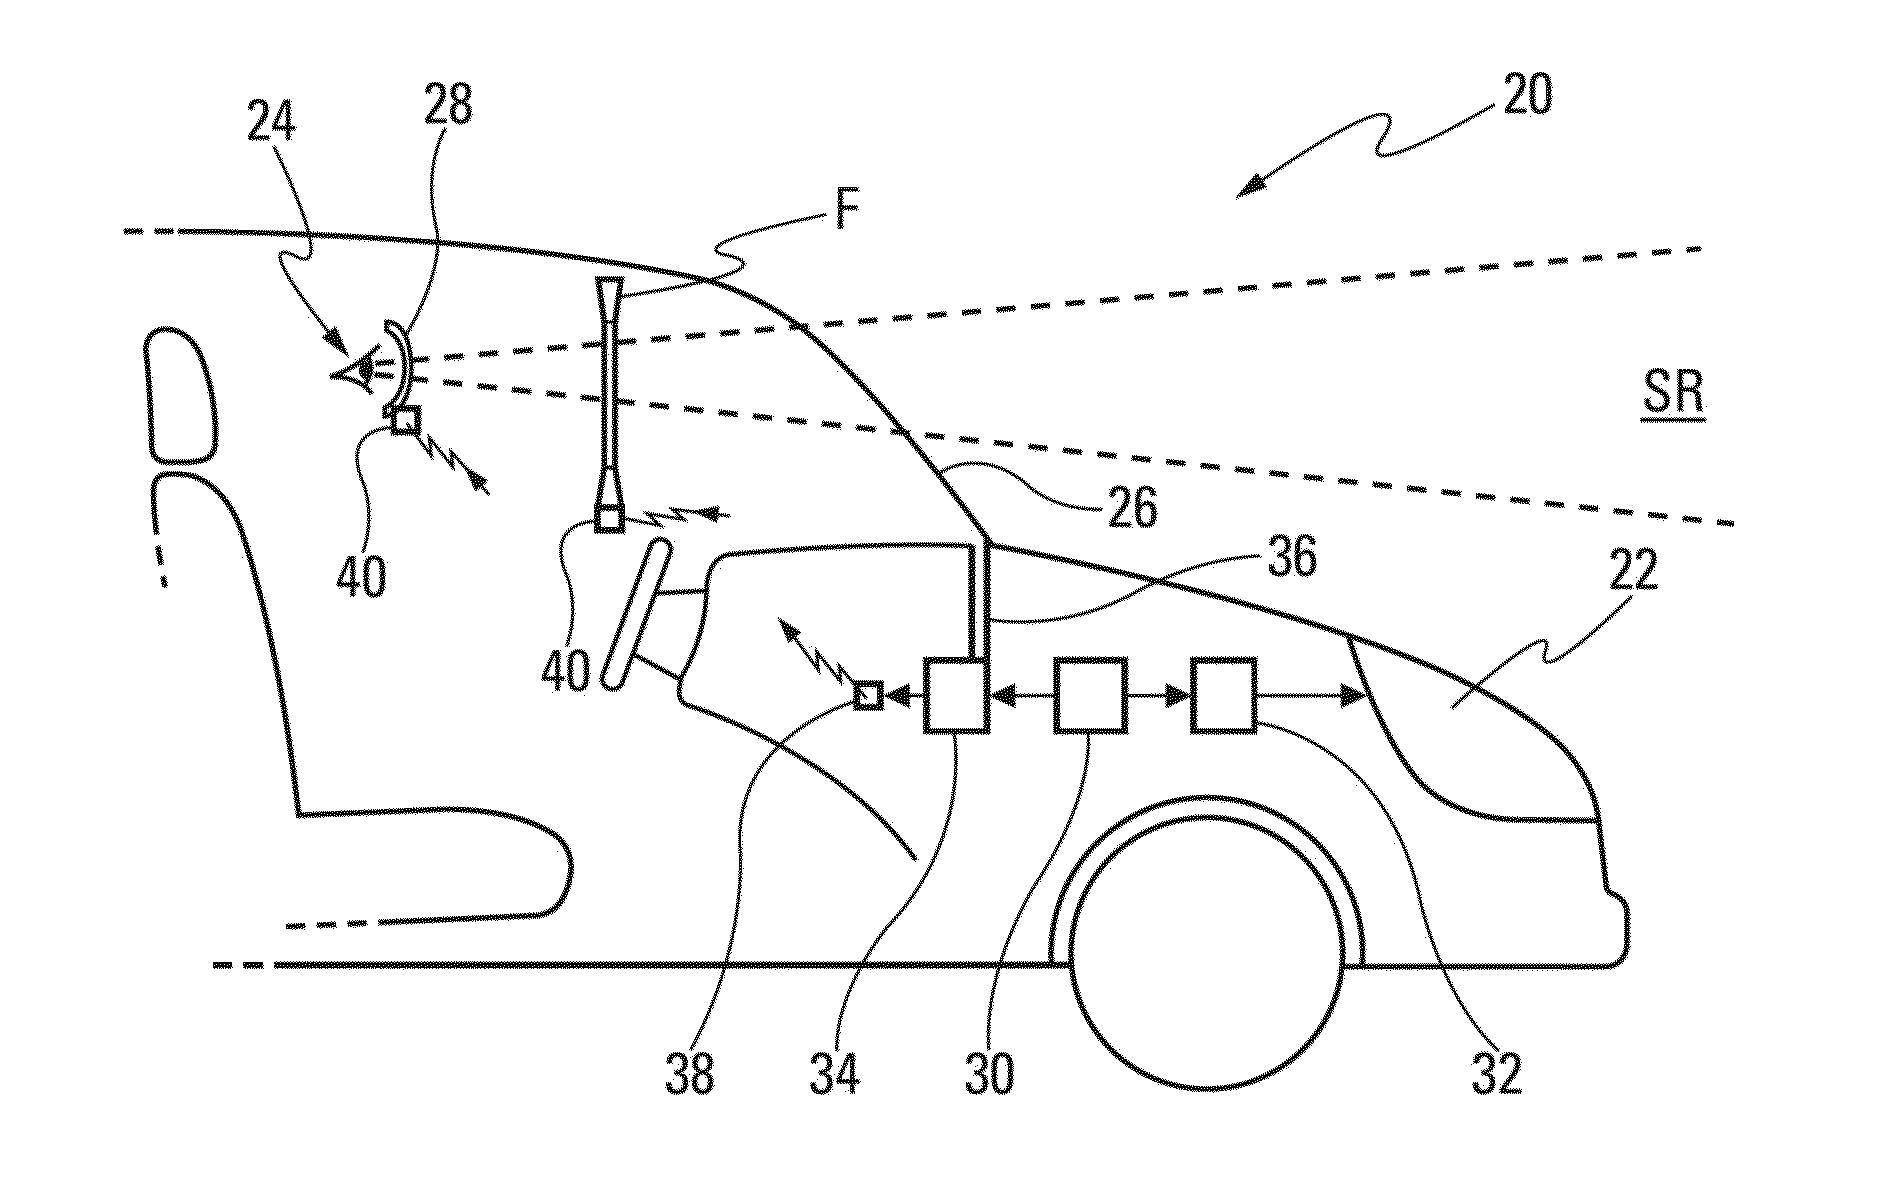 Driving assistance device and driving assistance method